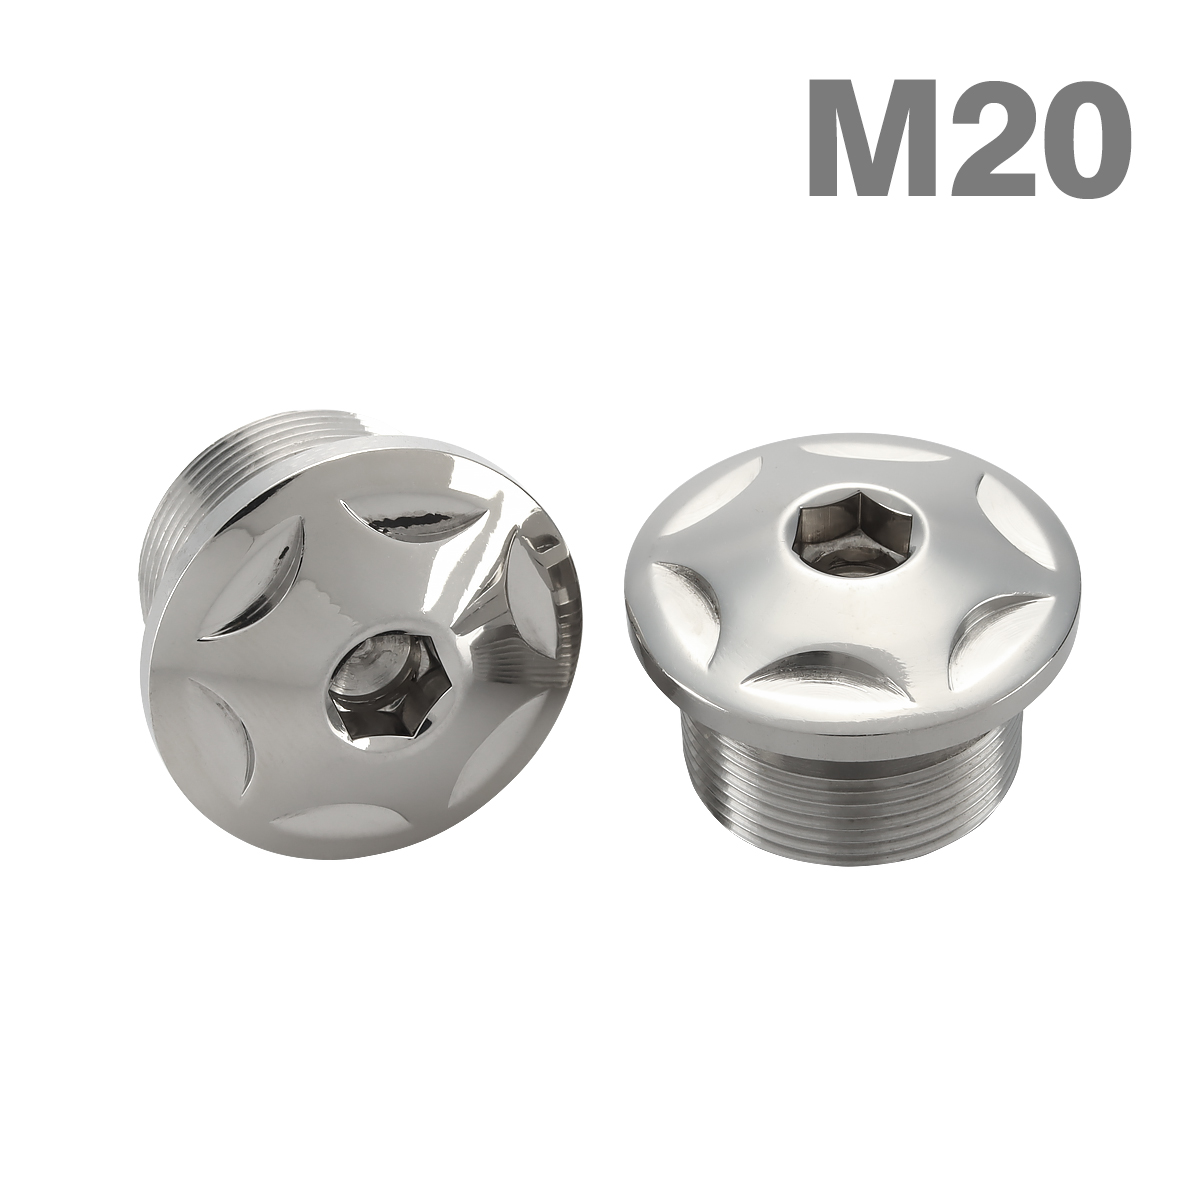  front fork top cap bolt M20×10mm left right set made of stainless steel silver color TH0107